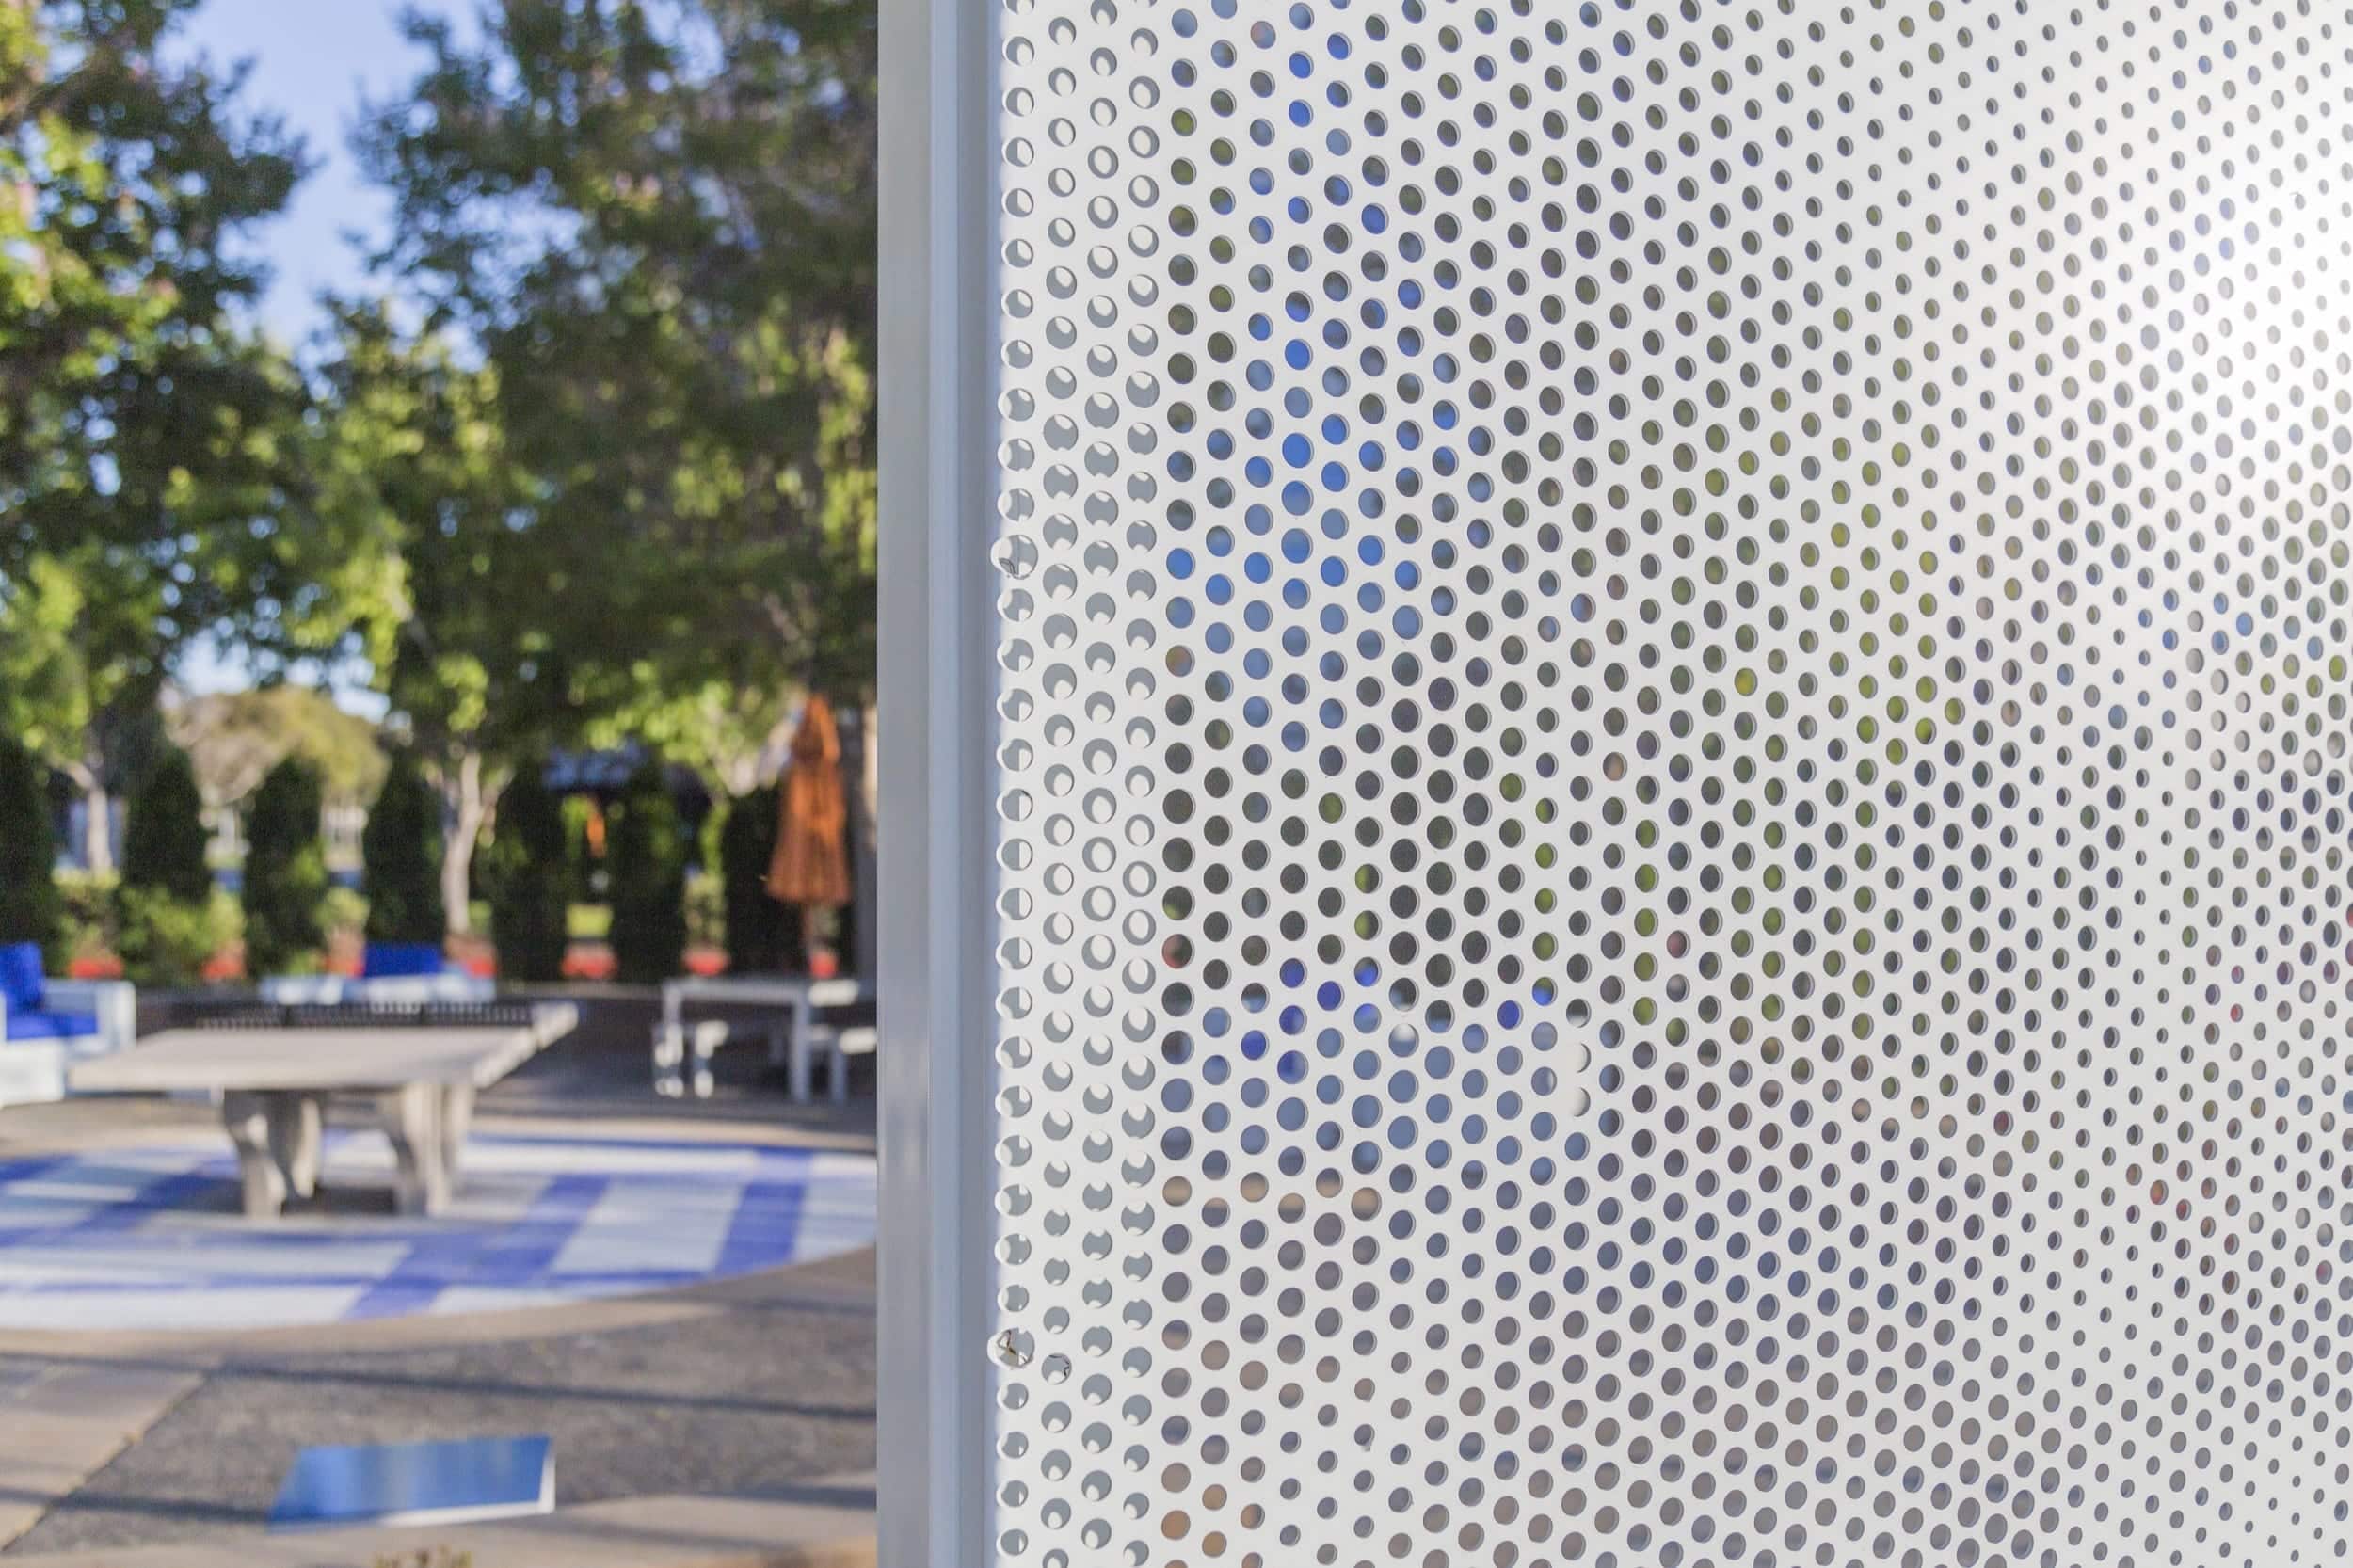 Curved free-standing ImageWall screen in painted aluminum for 1850 Gateway Courtyard.